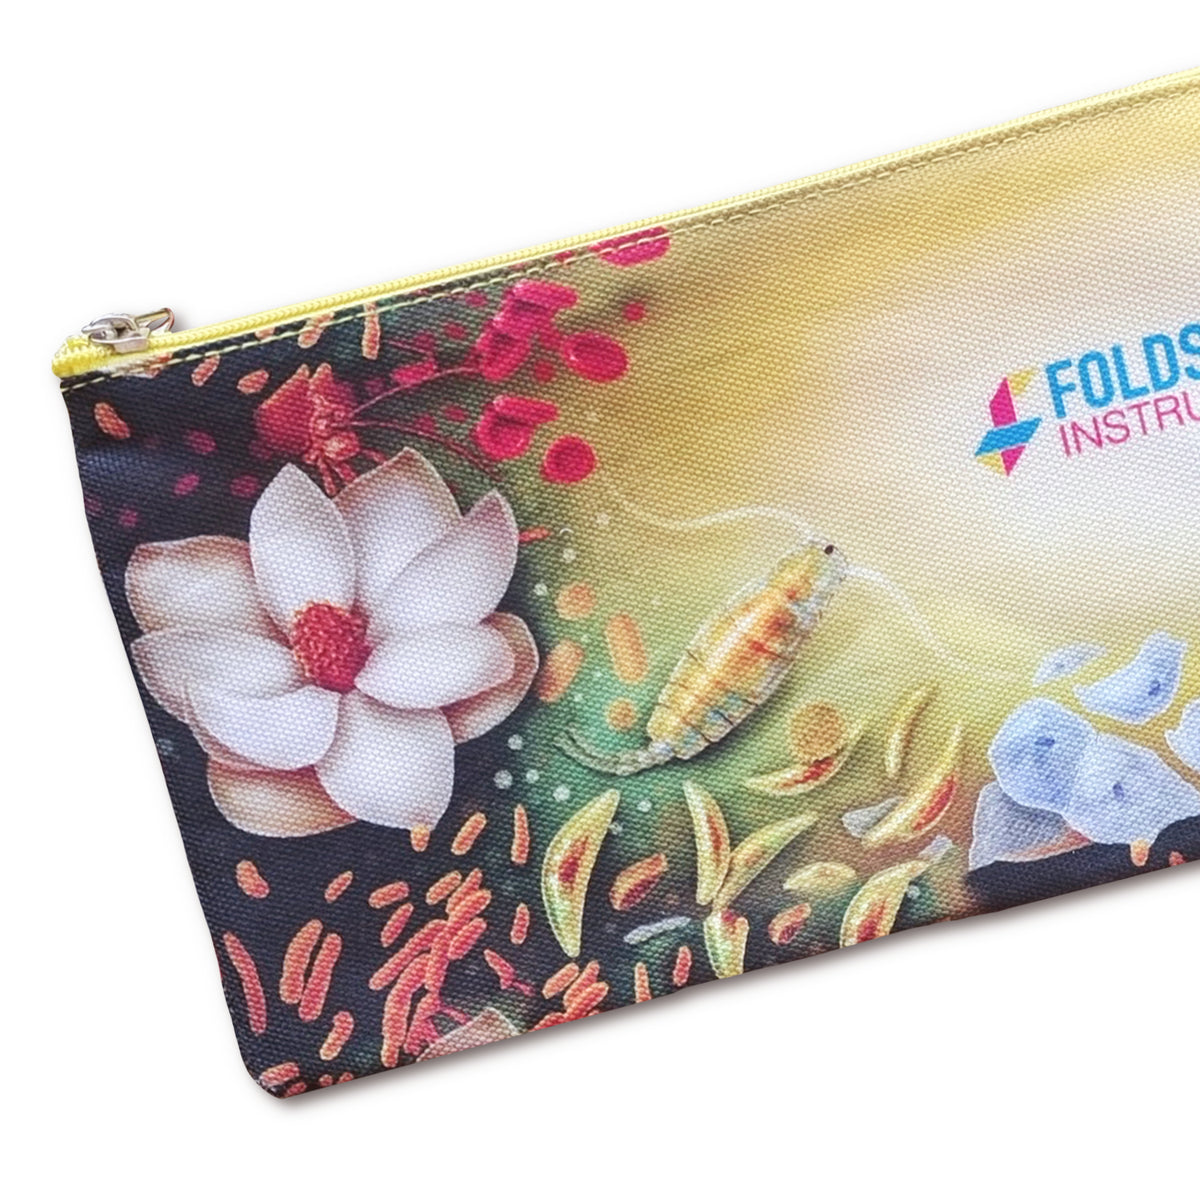 Foldscope Decorative Cloth Pouch - Holiday Savings Event! - Save 30% effective 11/5/23 - 12/17/23